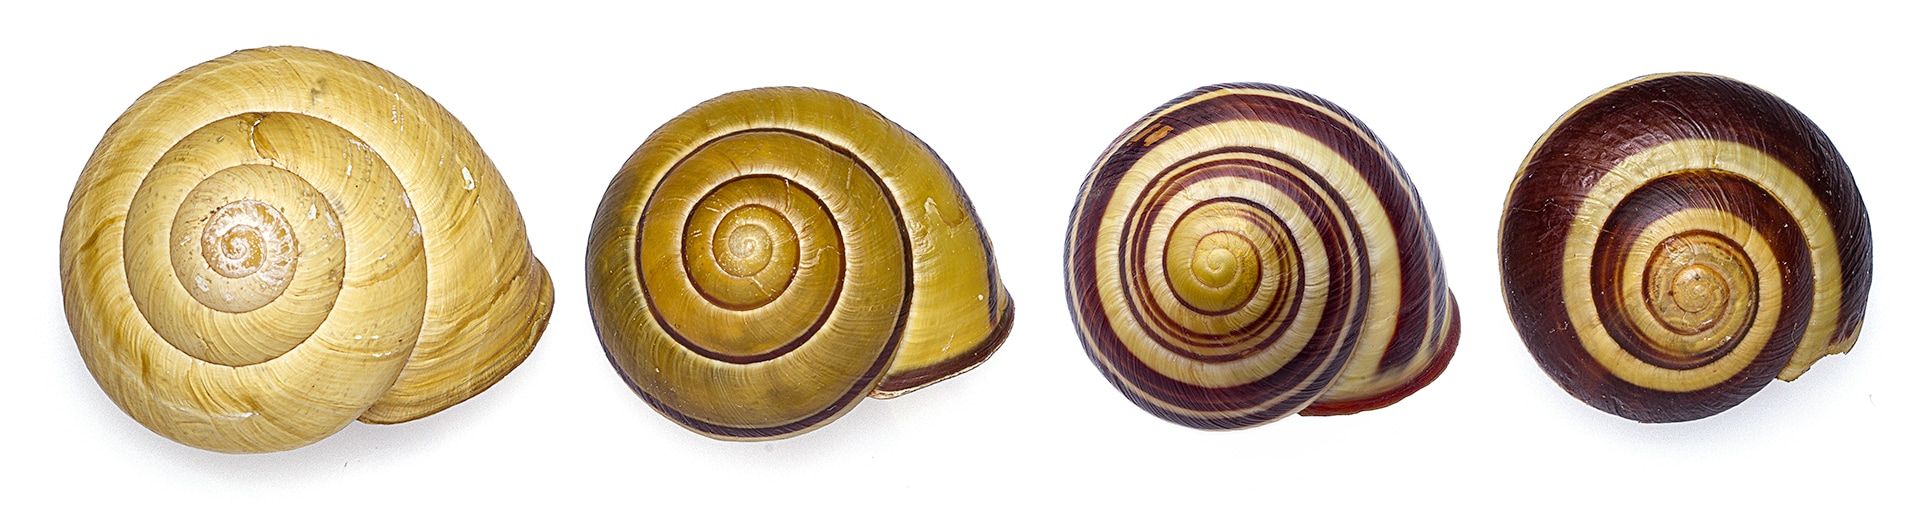 Variants of Cepaea nemoralis shells ranging from no stripes to thick dark stripes